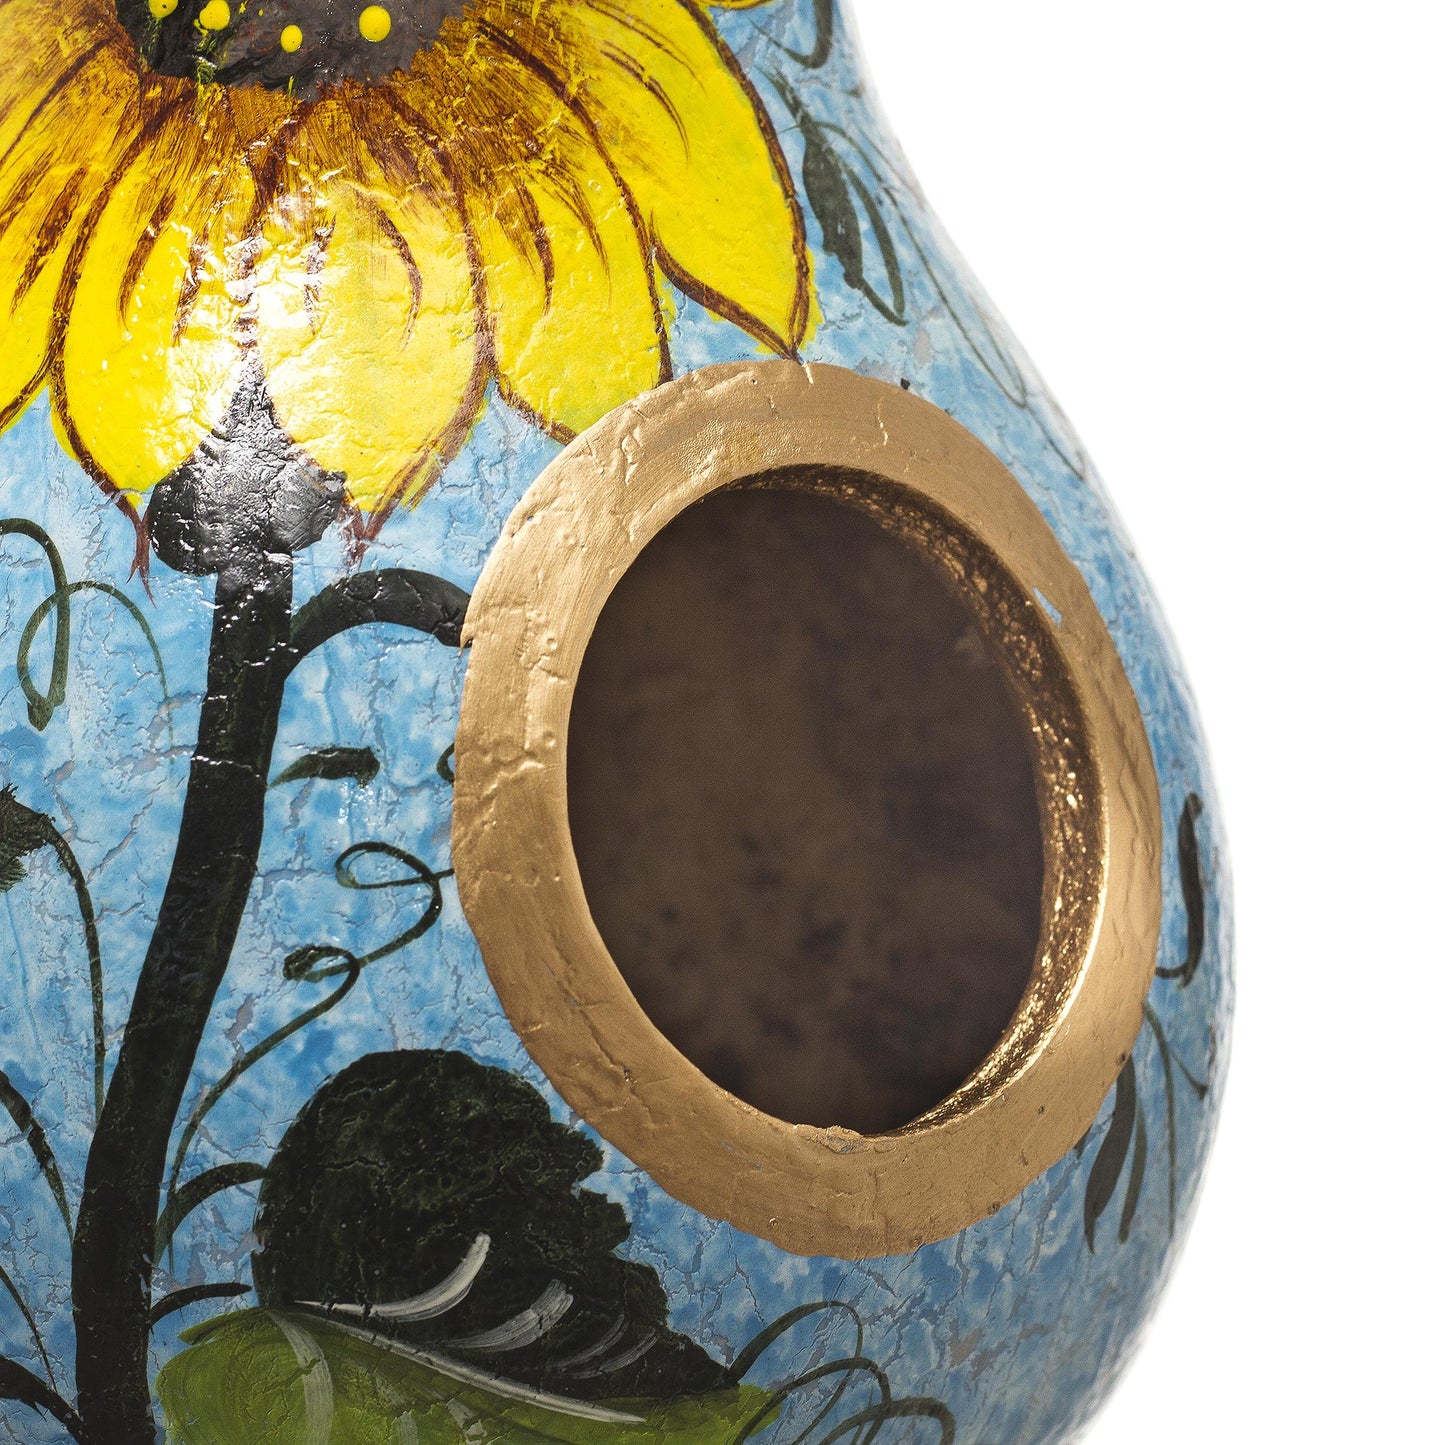 Sunflower and Sky Hand Painted Dried Gourd Birdhouse